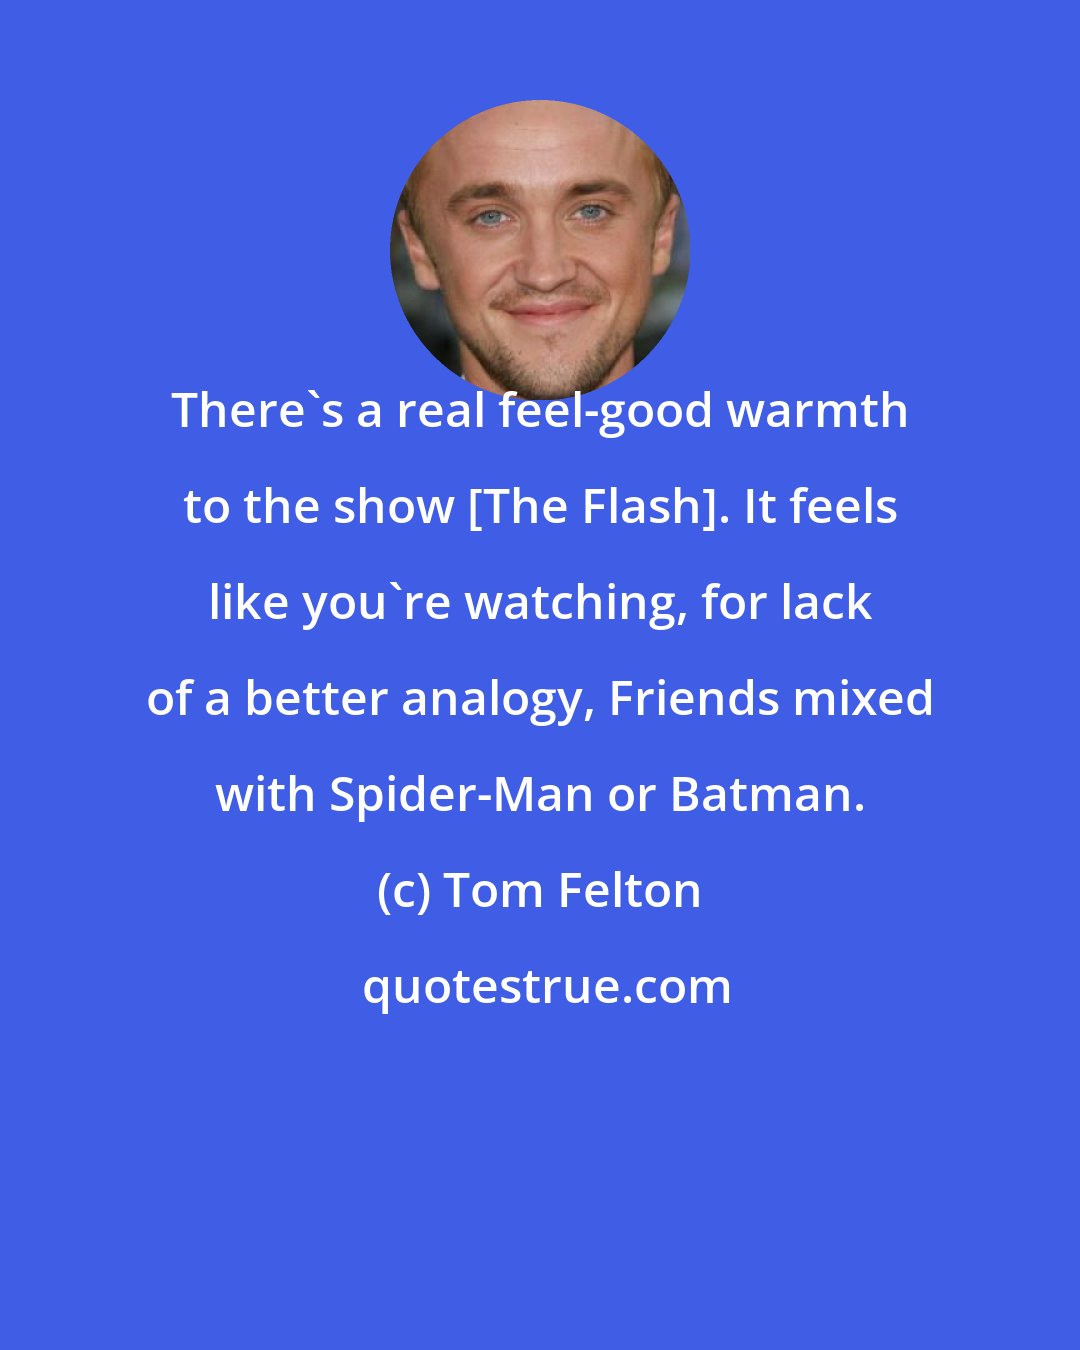 Tom Felton: There's a real feel-good warmth to the show [The Flash]. It feels like you're watching, for lack of a better analogy, Friends mixed with Spider-Man or Batman.